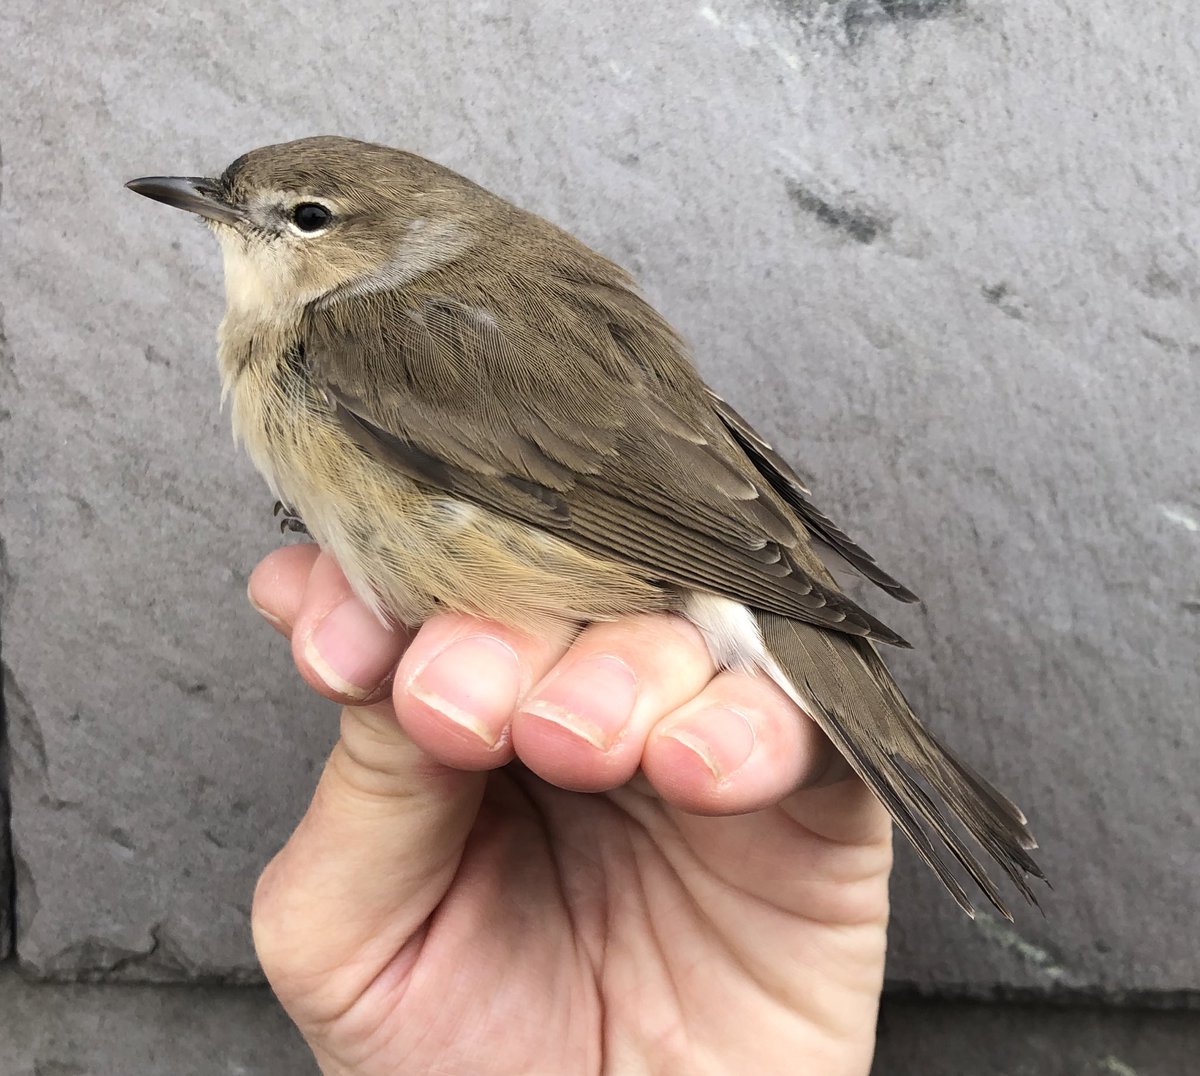 A brief early morning visit @hilbrebirdobs produced our first #GardenWarbler of the year - with a fat score of “40” and with a dark pollen horn ... where has it been feeding up?